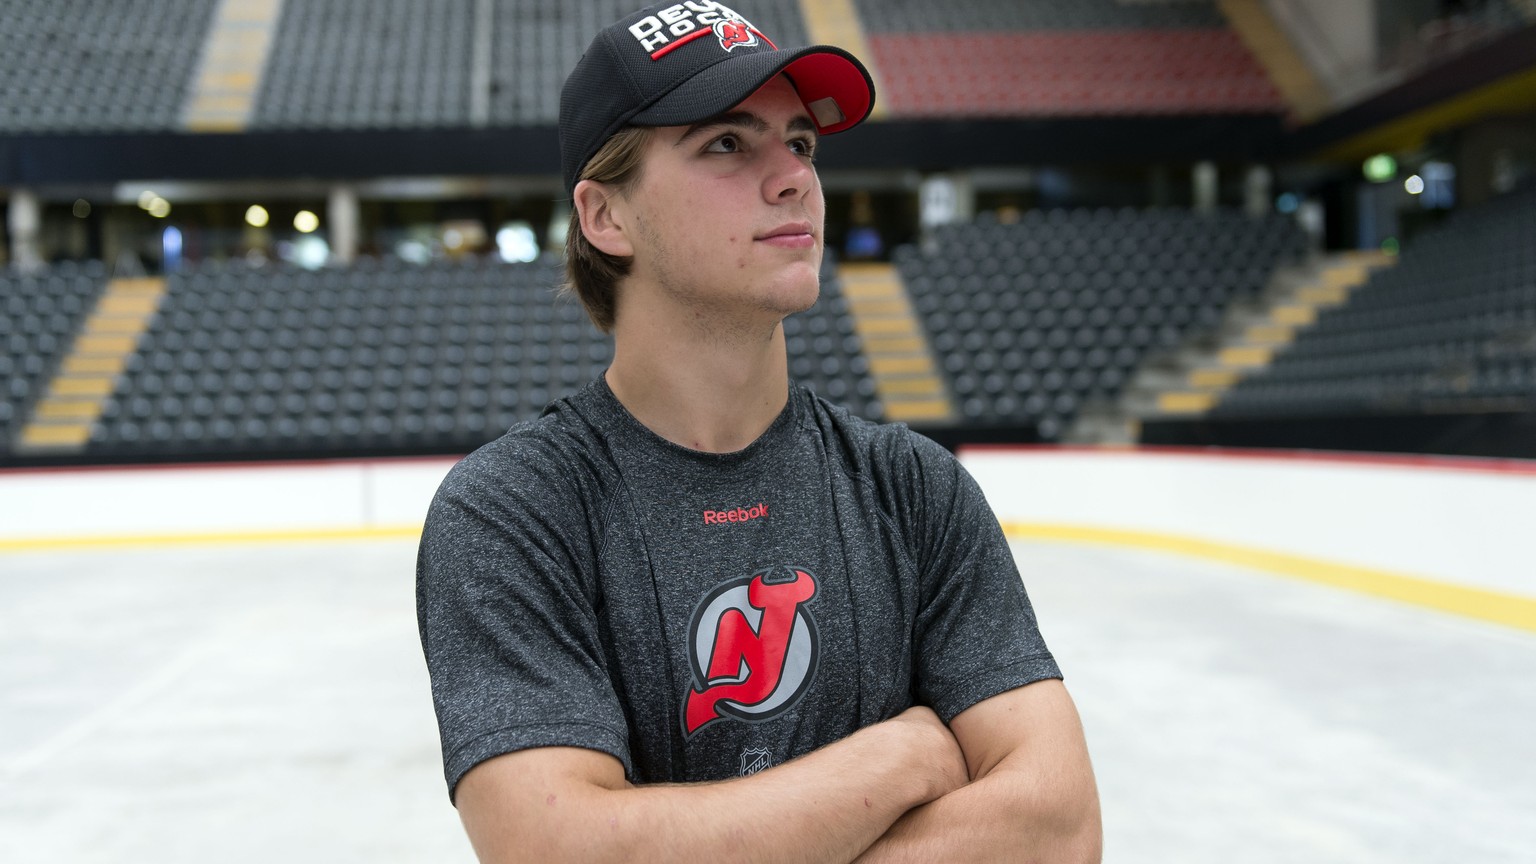 Nico Hischier, player of the New Jersey Devils Chicago, poses after a press conference in the PostFinance Arena on Thursday, July 6, 2017 in Bern. (KEYSTONE/Thomas Delley)

Nico Hischier, Spieler de ...